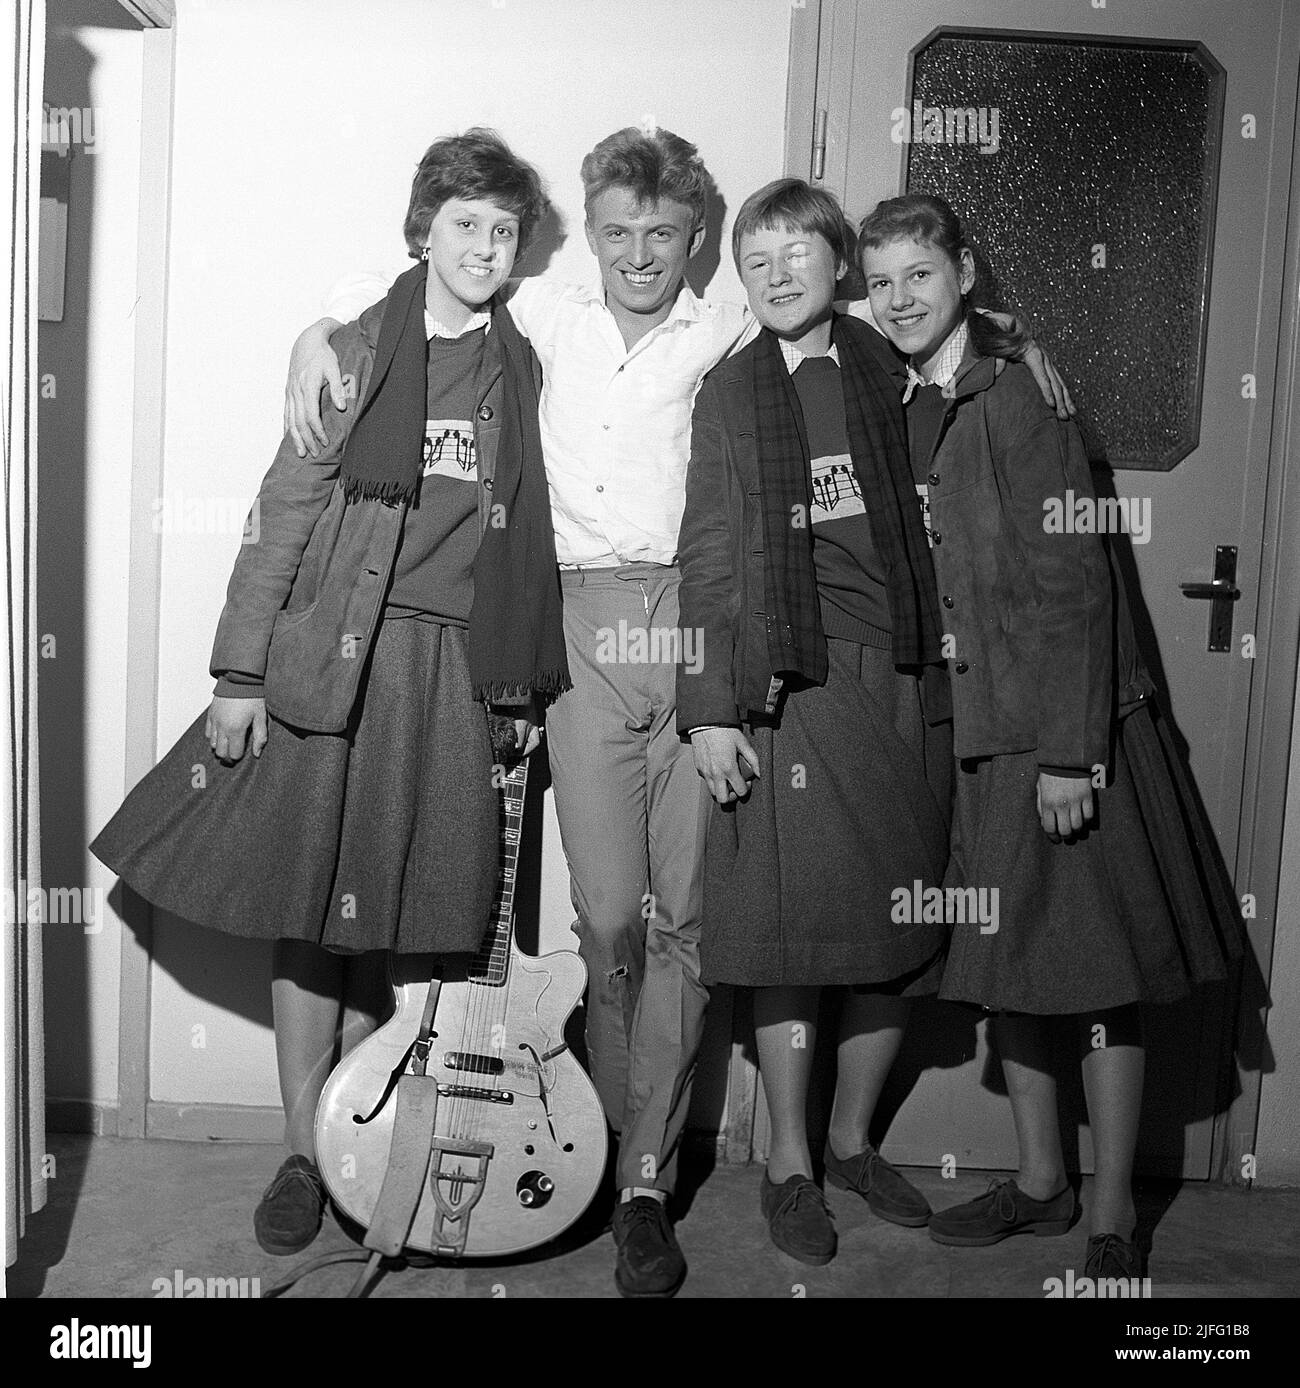 Tommy Steele. English entertainer regarded as Britain's first teen idol and rock and roll star. Born december 17 1936. Picture taken when he performed in Stockholm Sweden April 19 1958. Three fans has gotten the chance to meet with Tommy back stage. Stock Photo